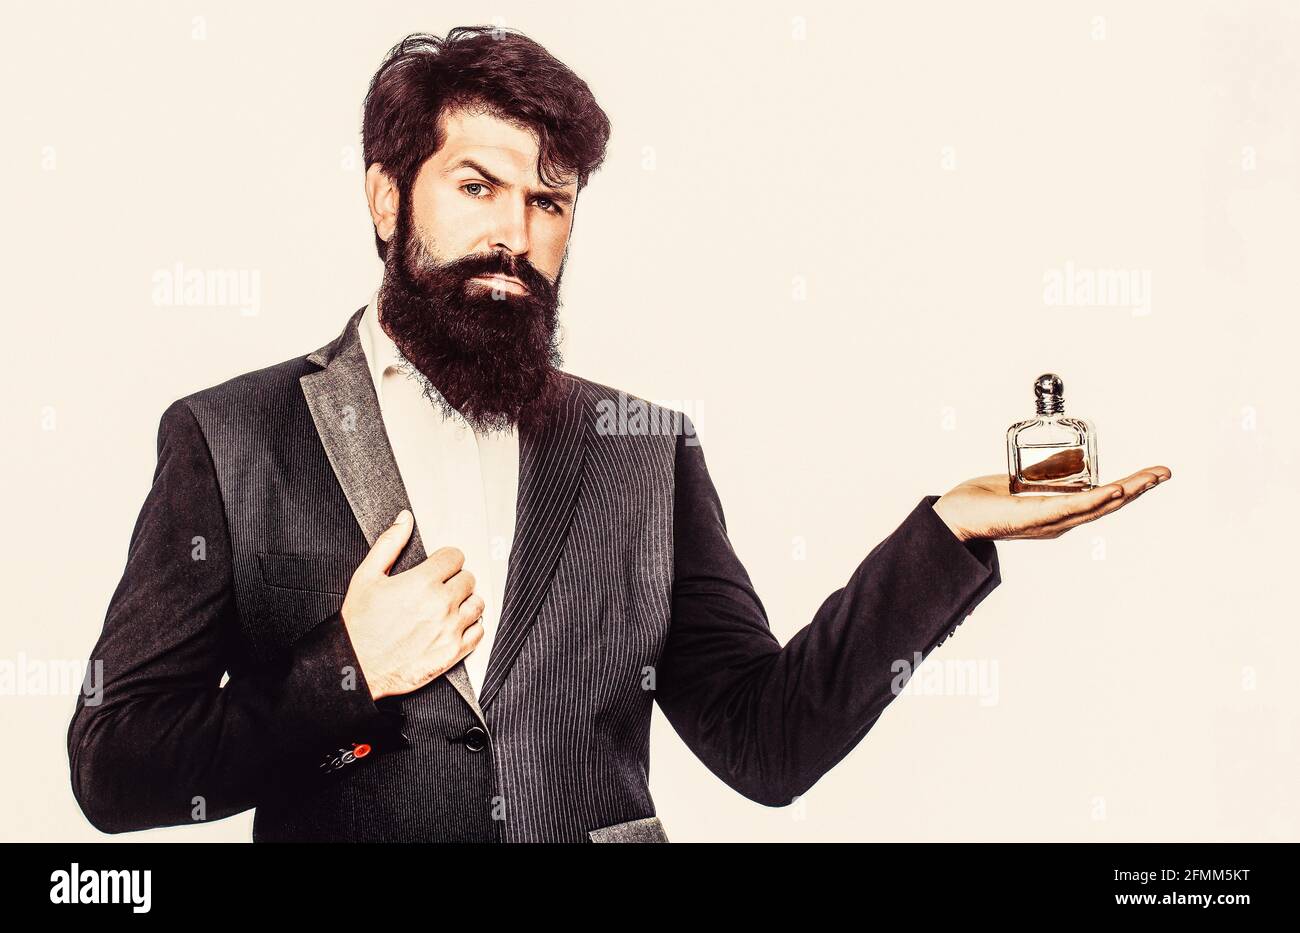 https://c8.alamy.com/comp/2FMM5KT/male-holding-up-bottle-of-perfume-man-perfume-fragrance-perfume-or-cologne-bottle-and-perfumery-cosmetics-scent-cologne-bottle-male-holding-2FMM5KT.jpg